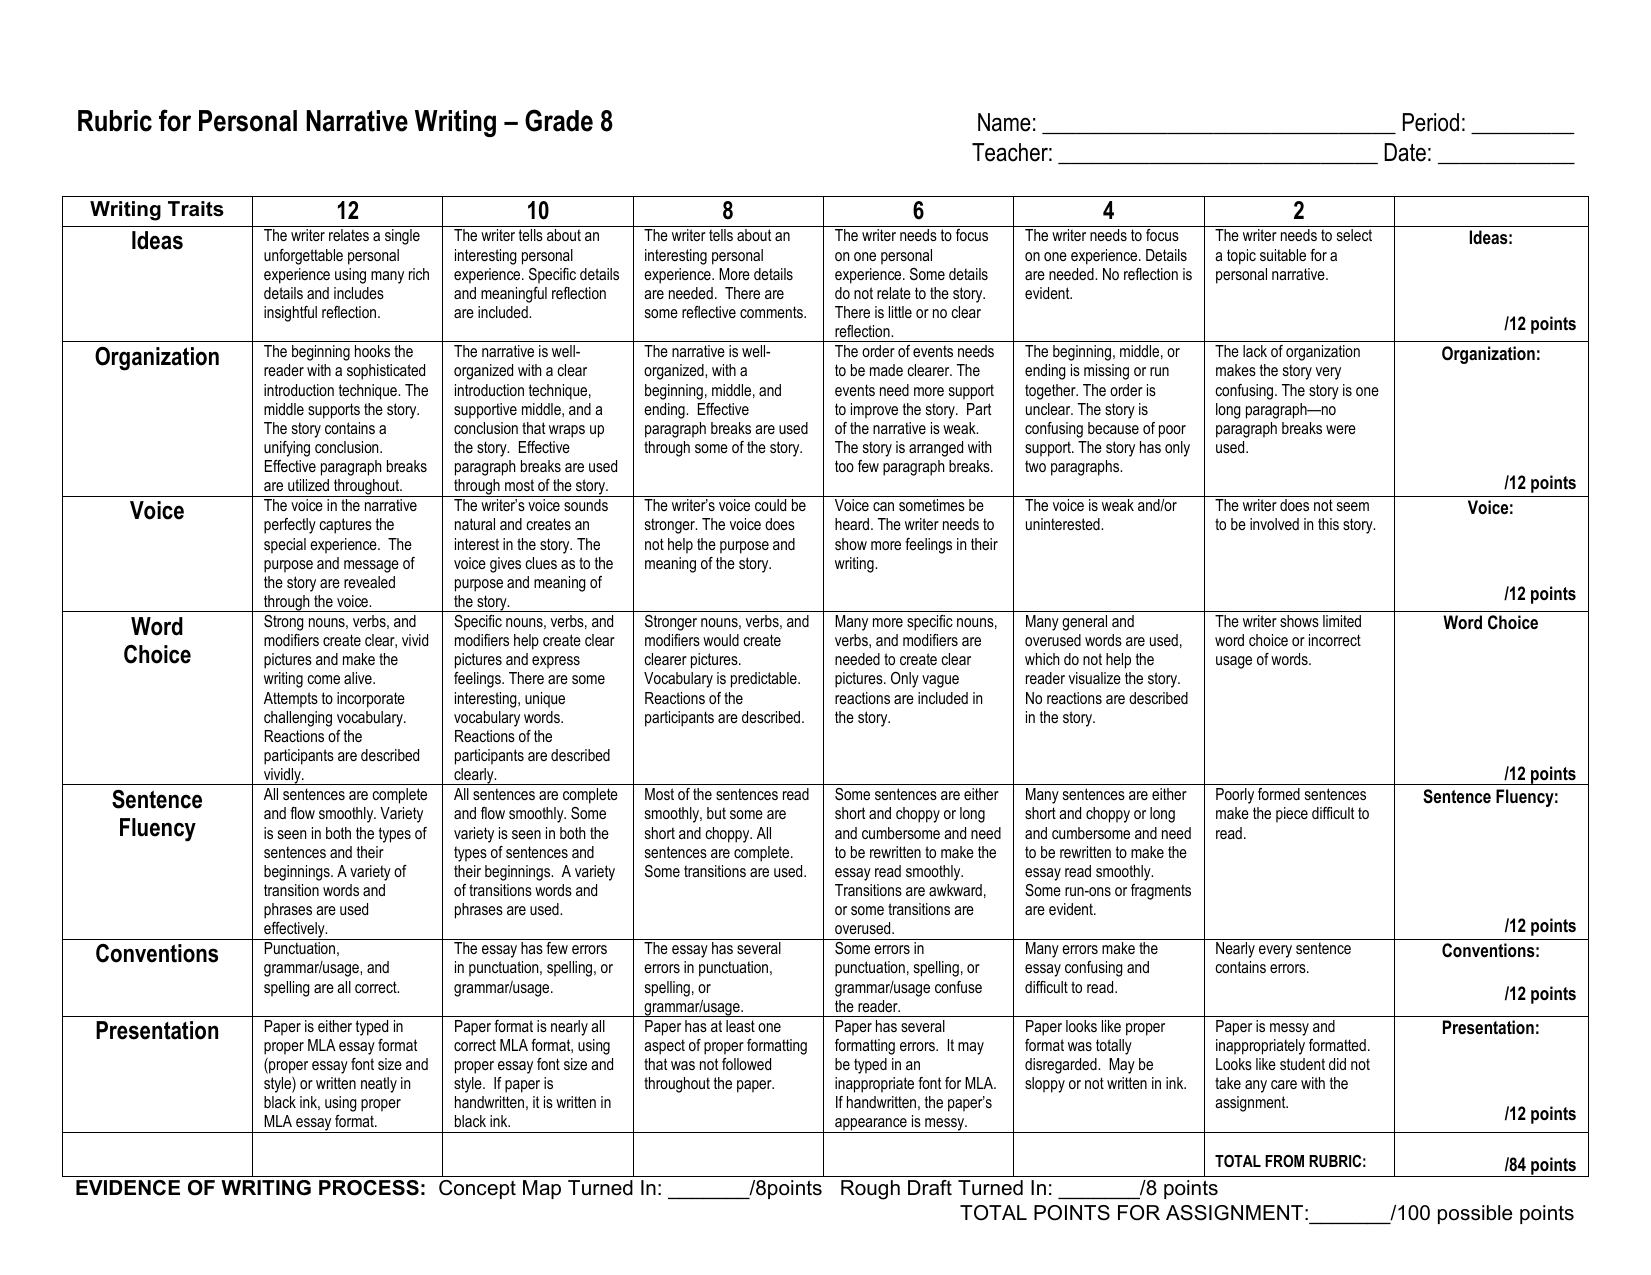 new-rubric-for-personal-narrative